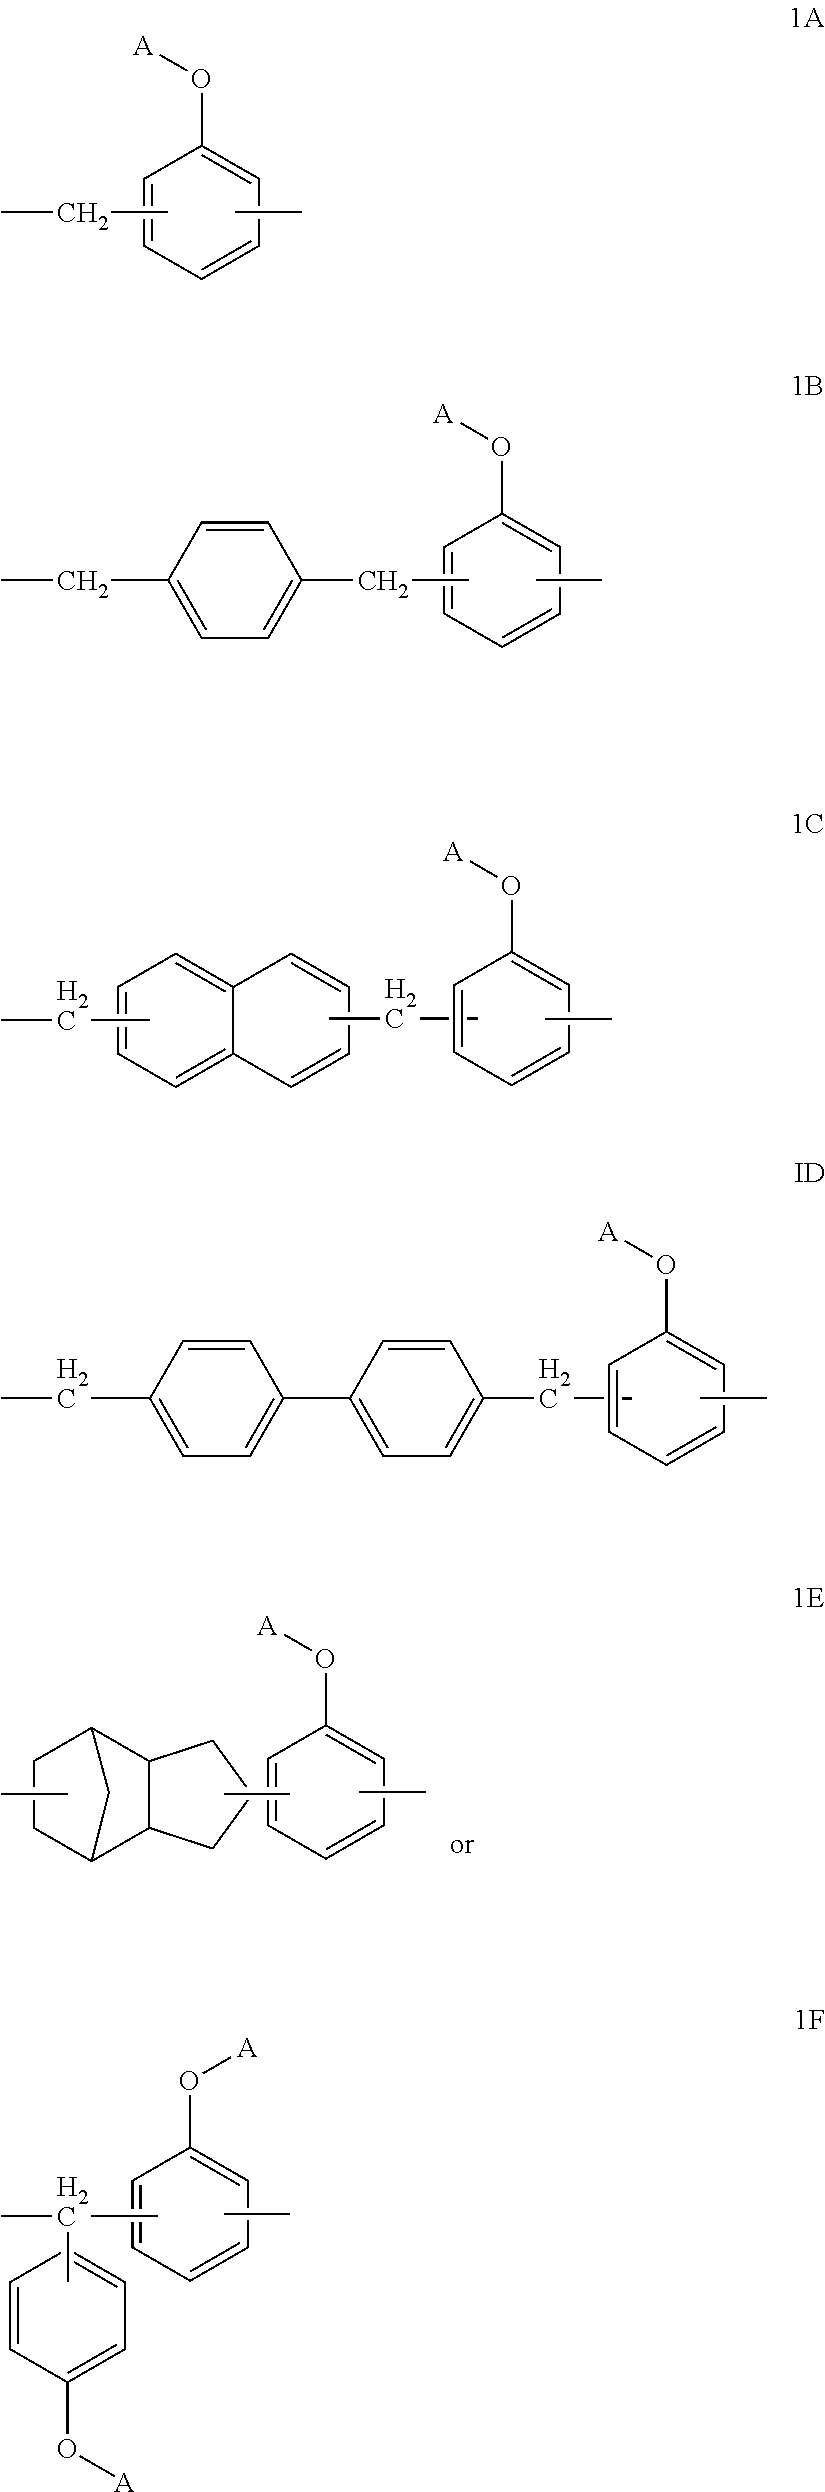 Novel novolac curing agent with alkoxysilyl group, method for preparing the same, composition containing the same, the cured product, and use thereof